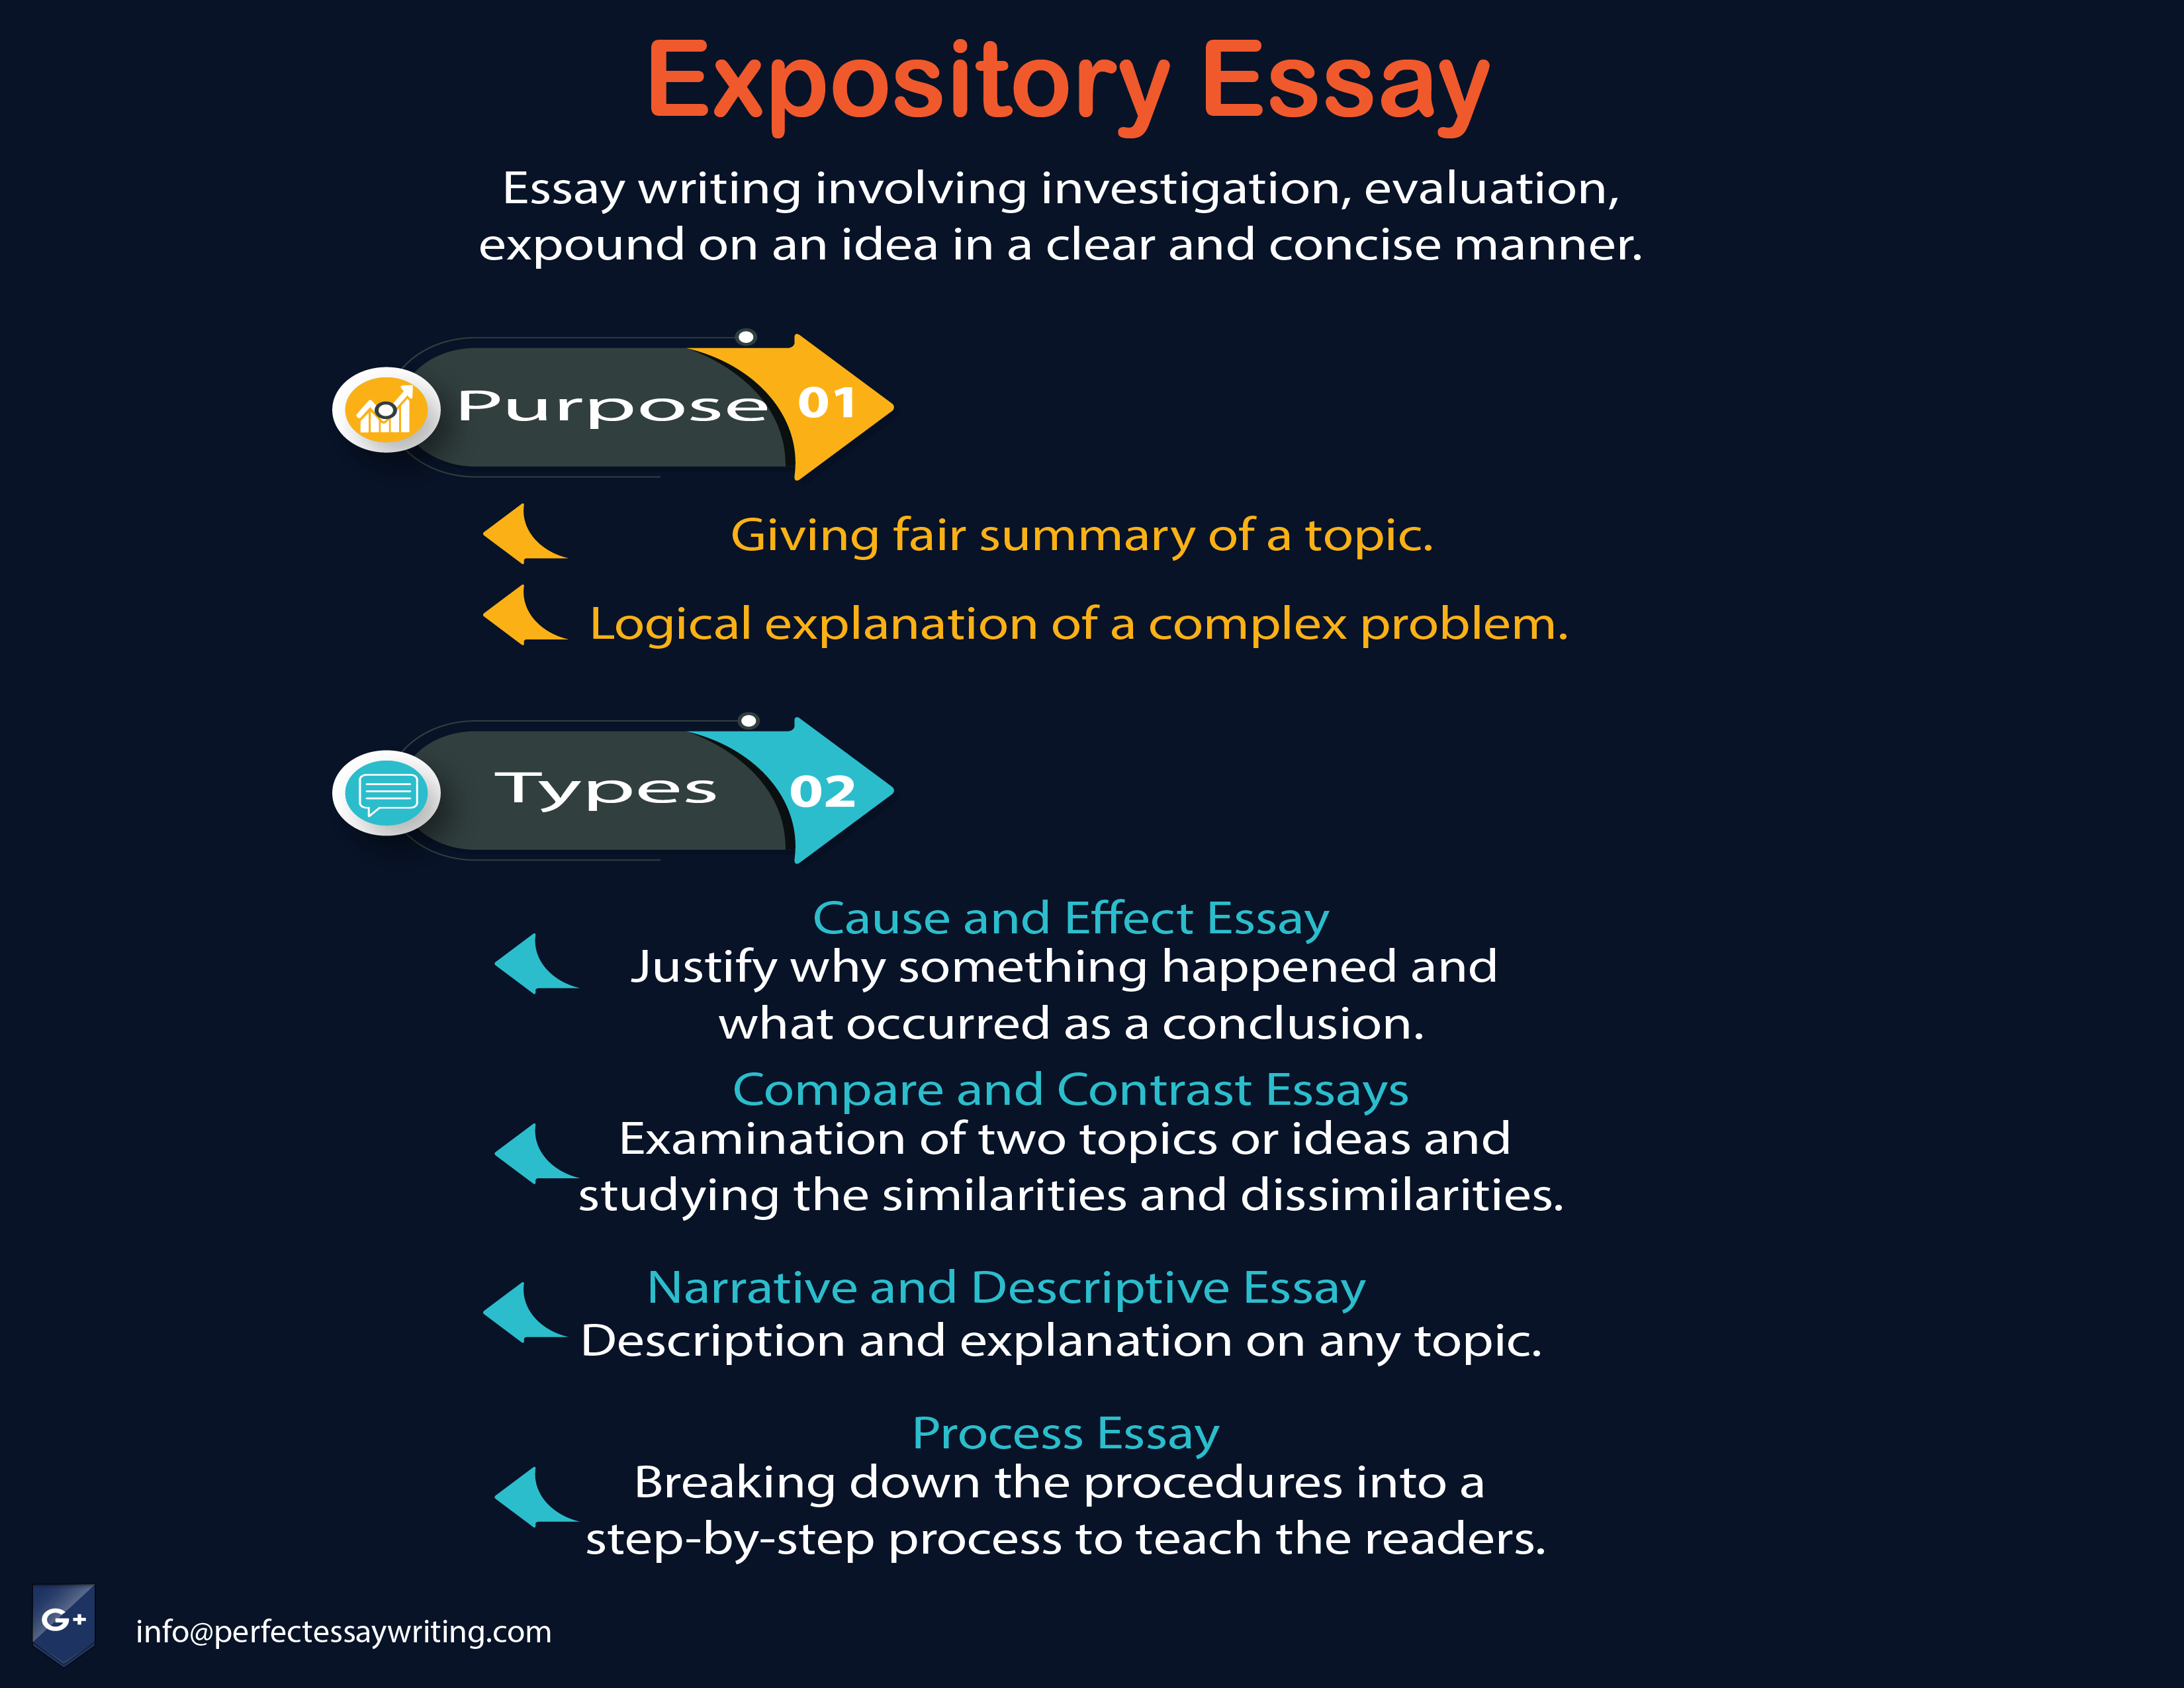 How To Start An Expository Essay